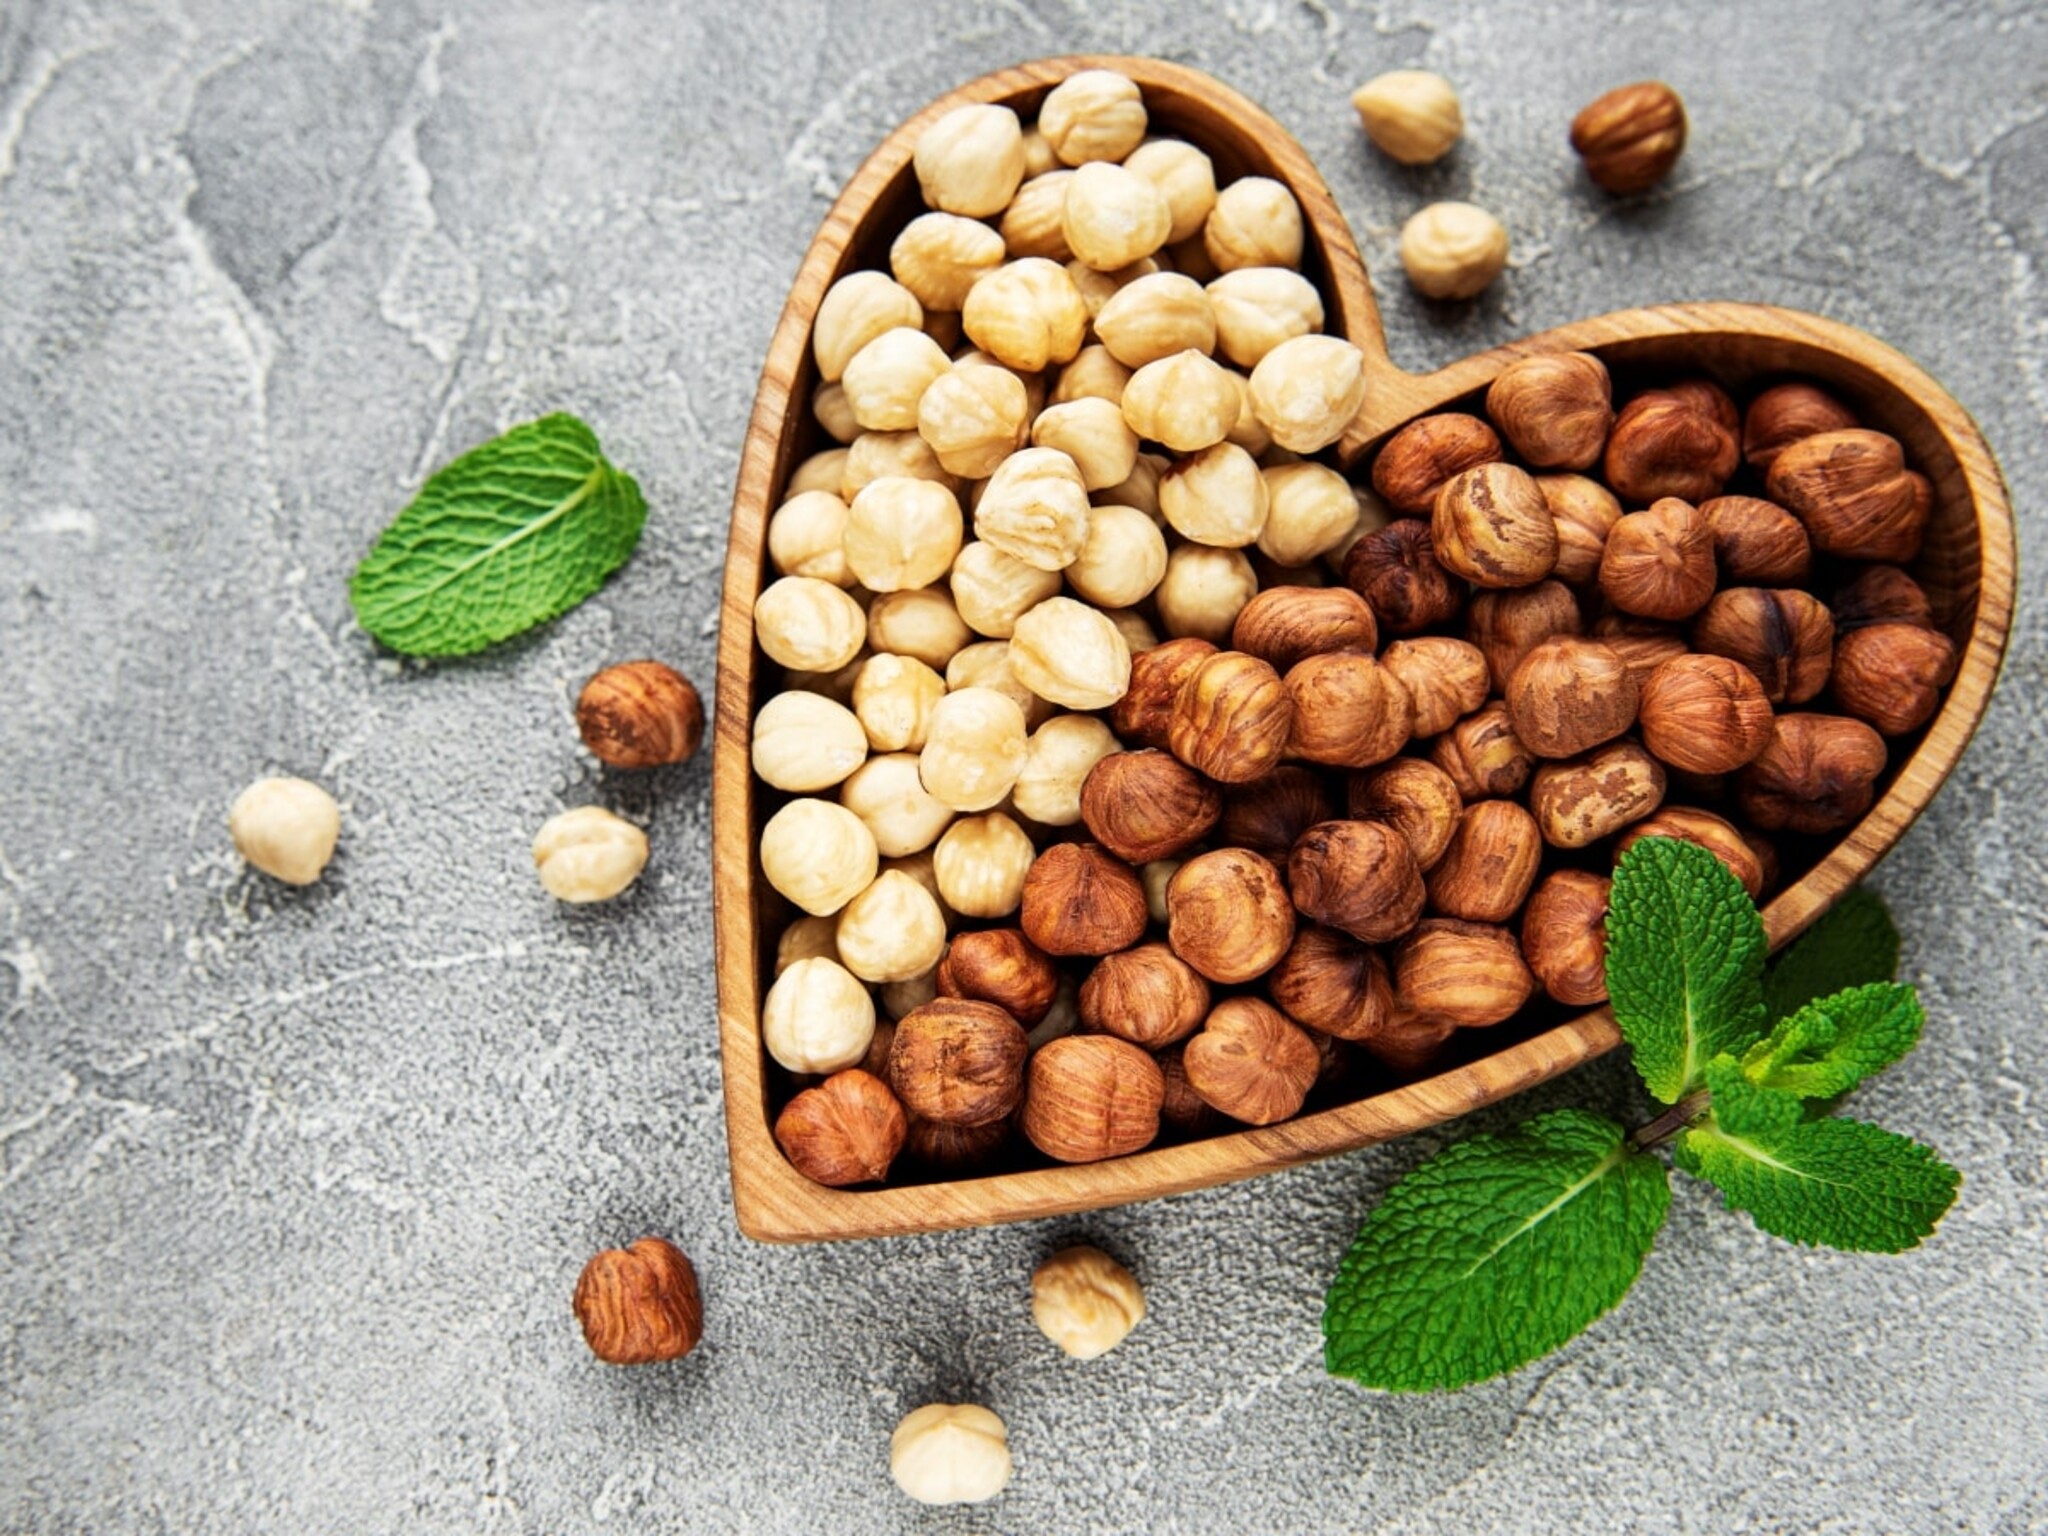 "Daily Nuts: How They Influence Your Health"